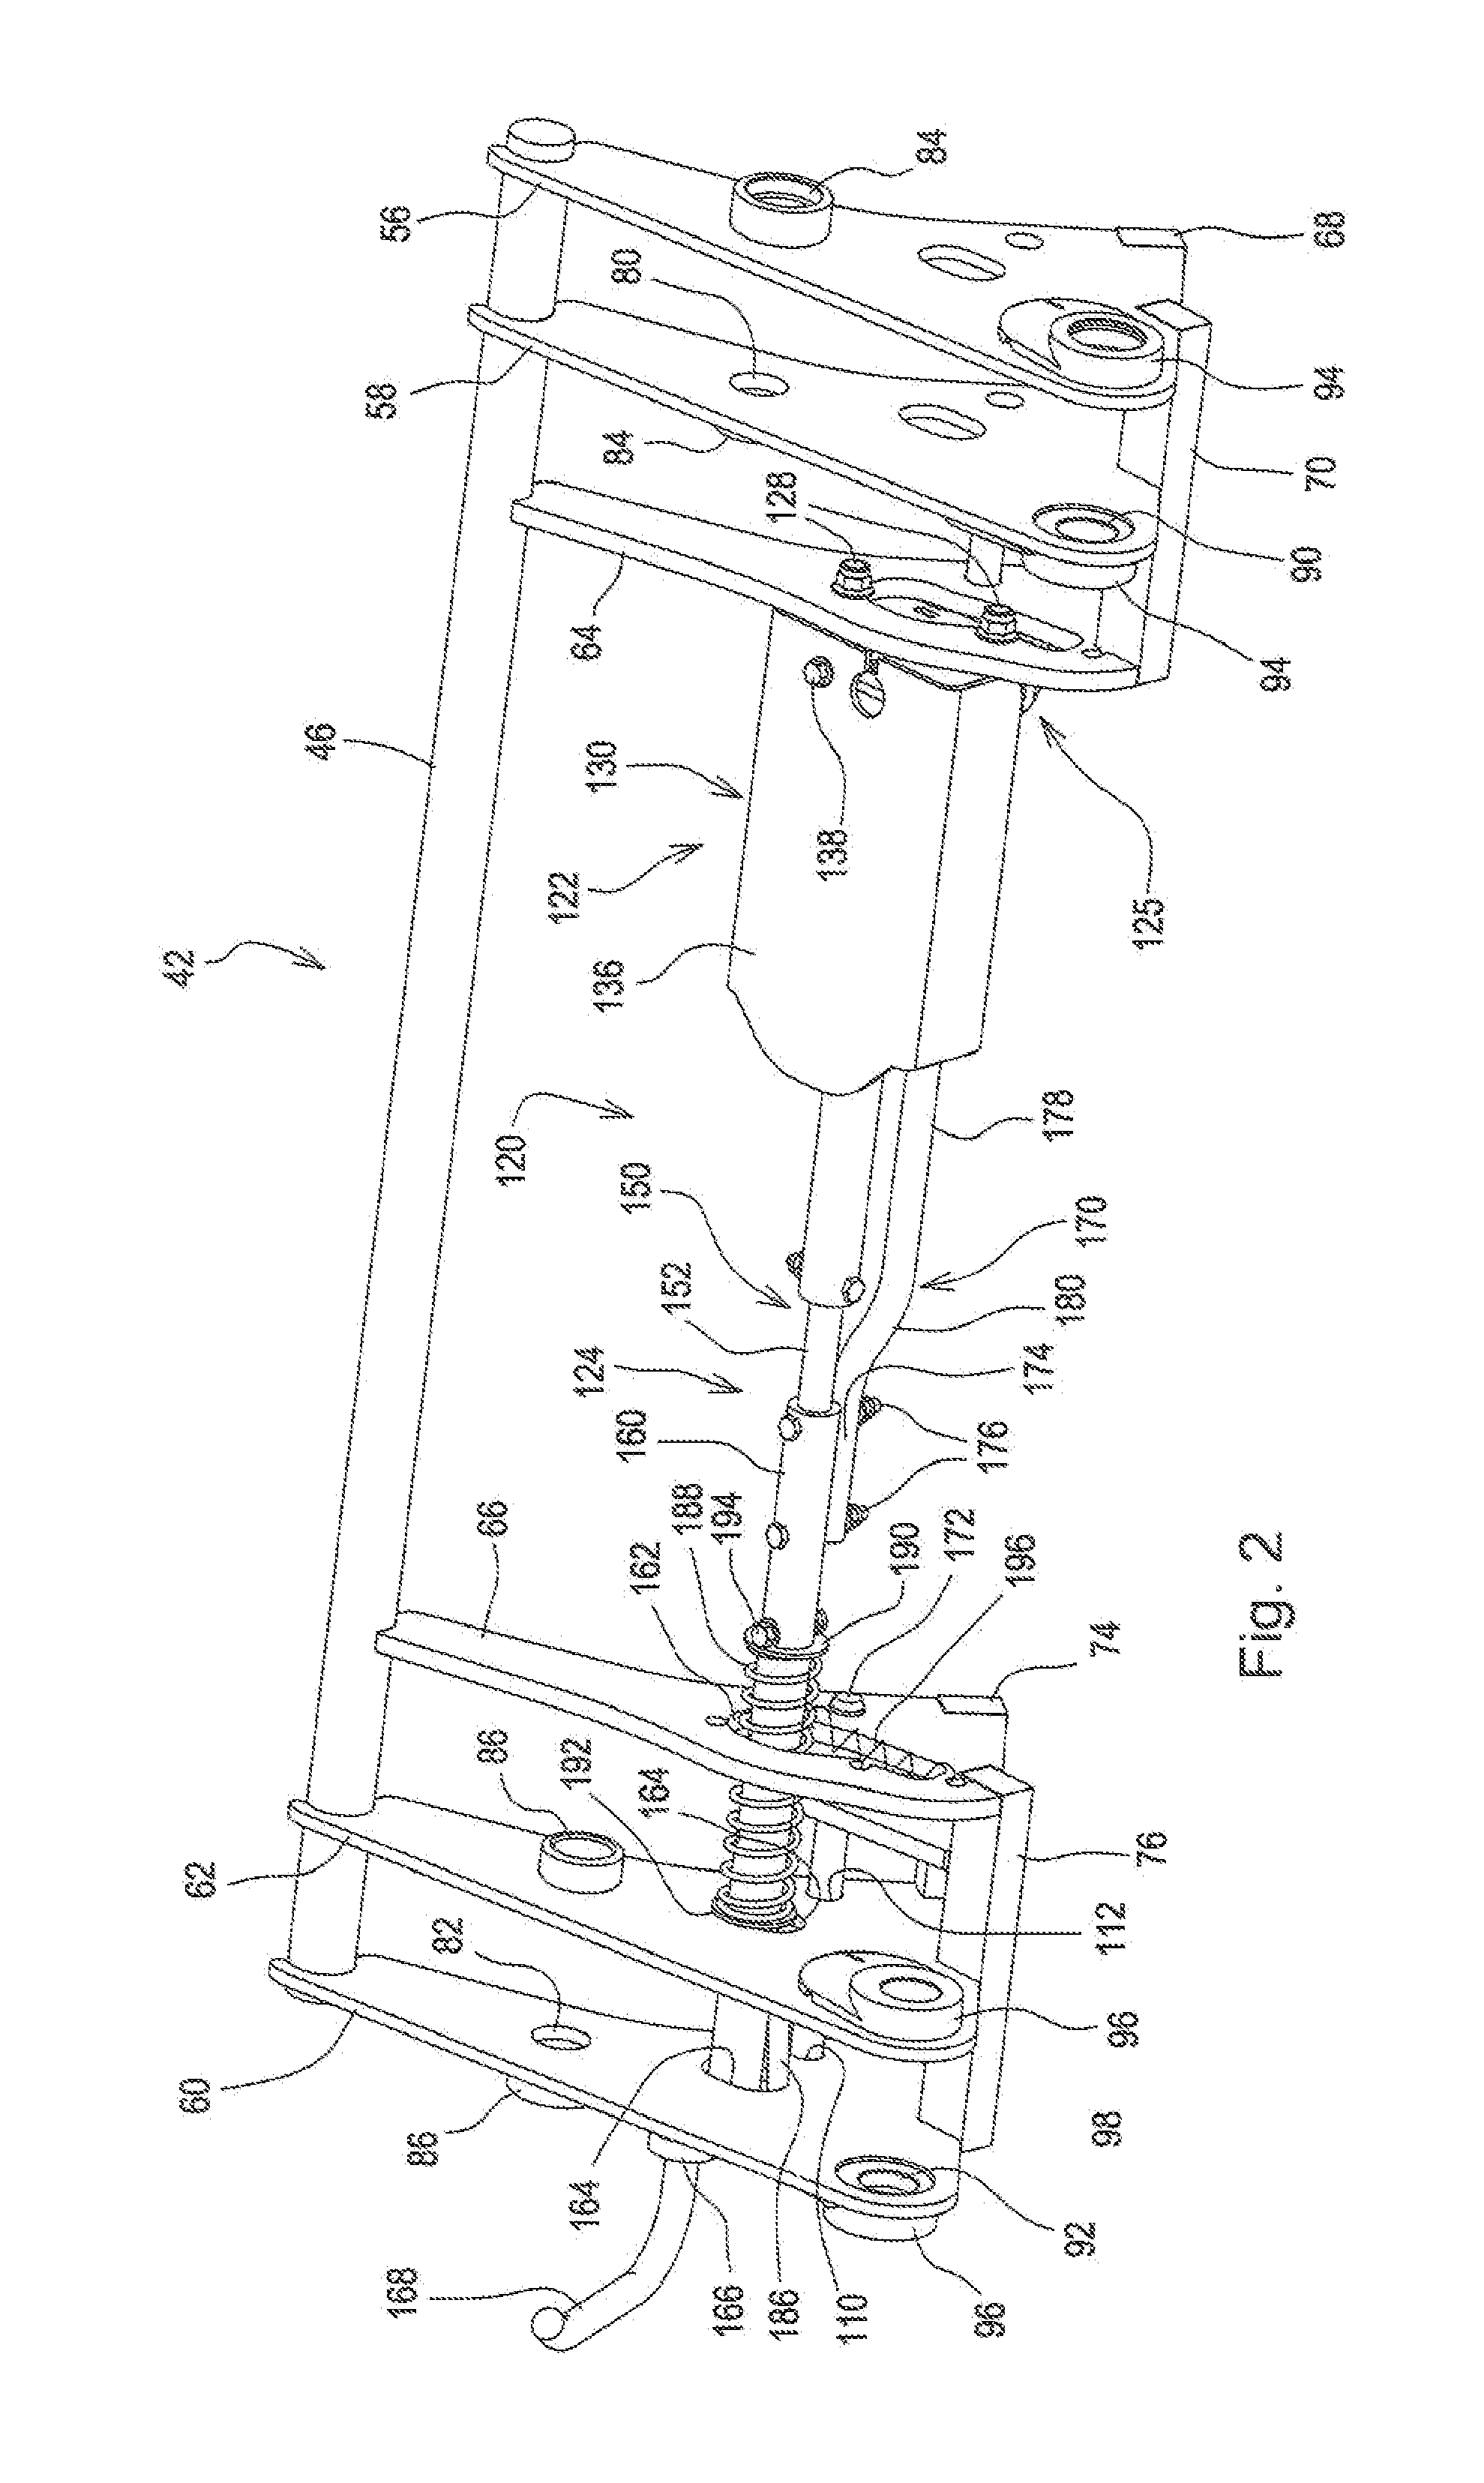 Latching System For Securing An Implement To A Carrier Mounted To A Lifting Arm